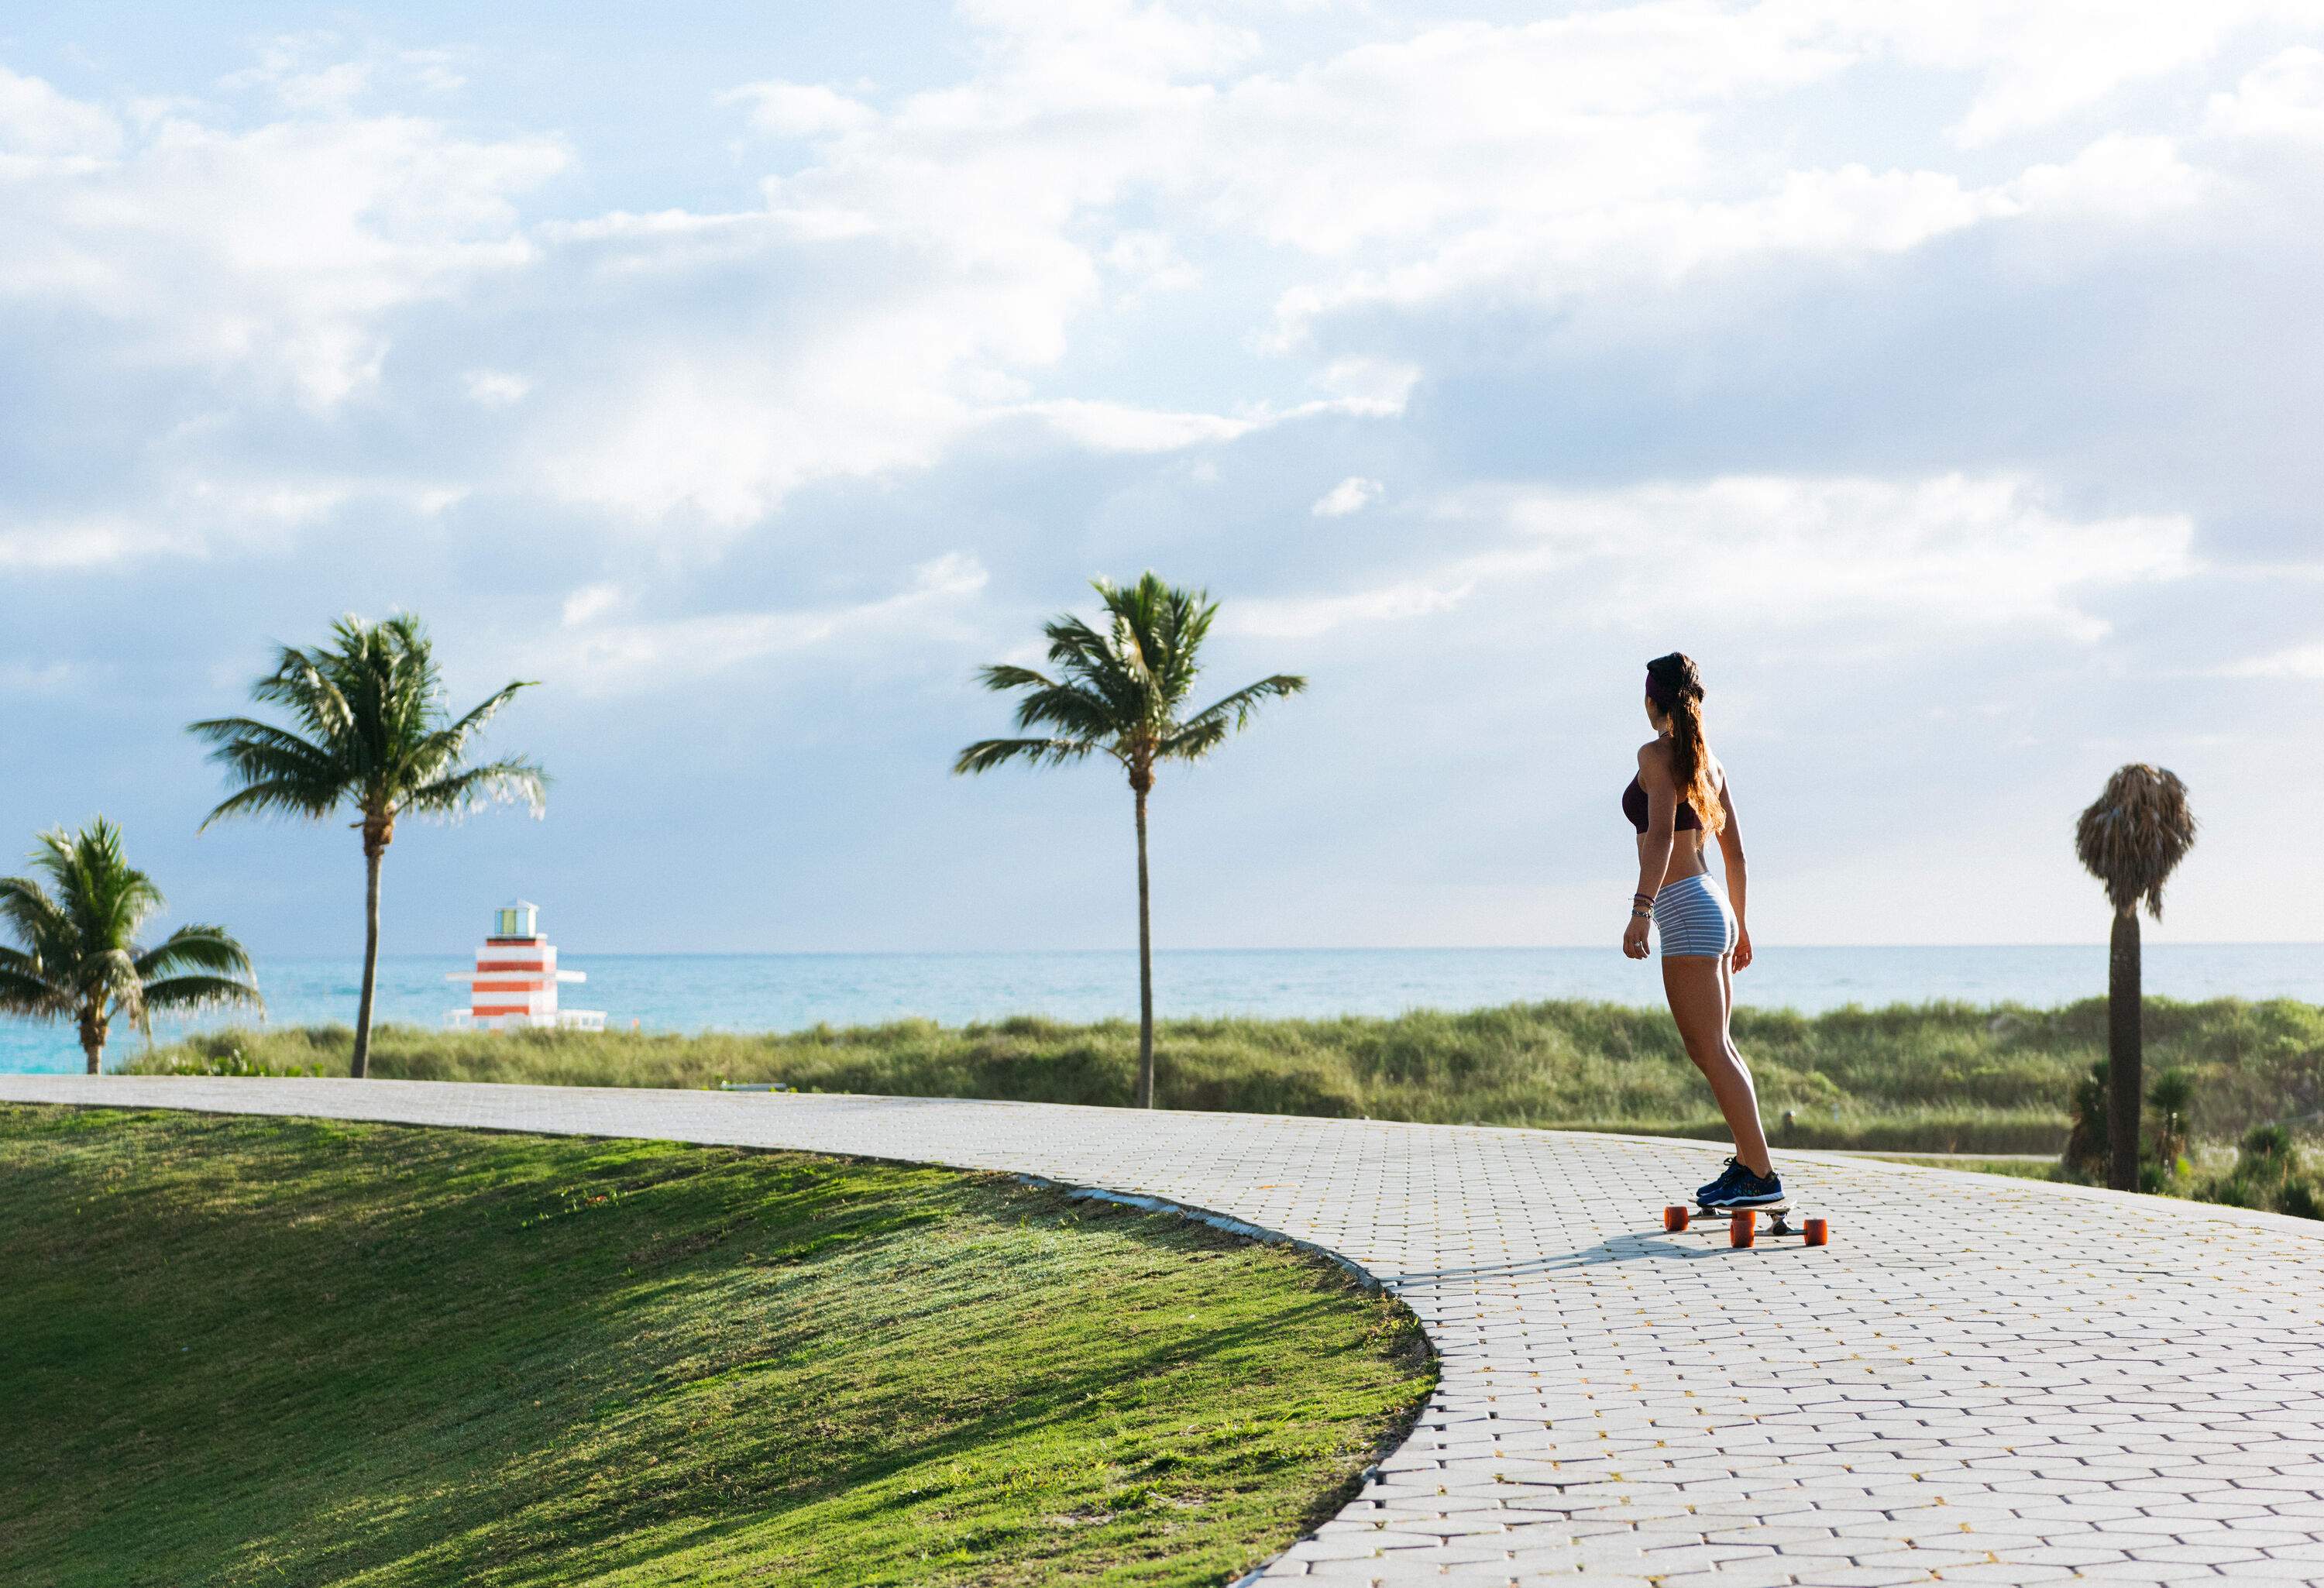 A woman skateboards down a curved concrete path on a grassy hill with vast views of the ocean.